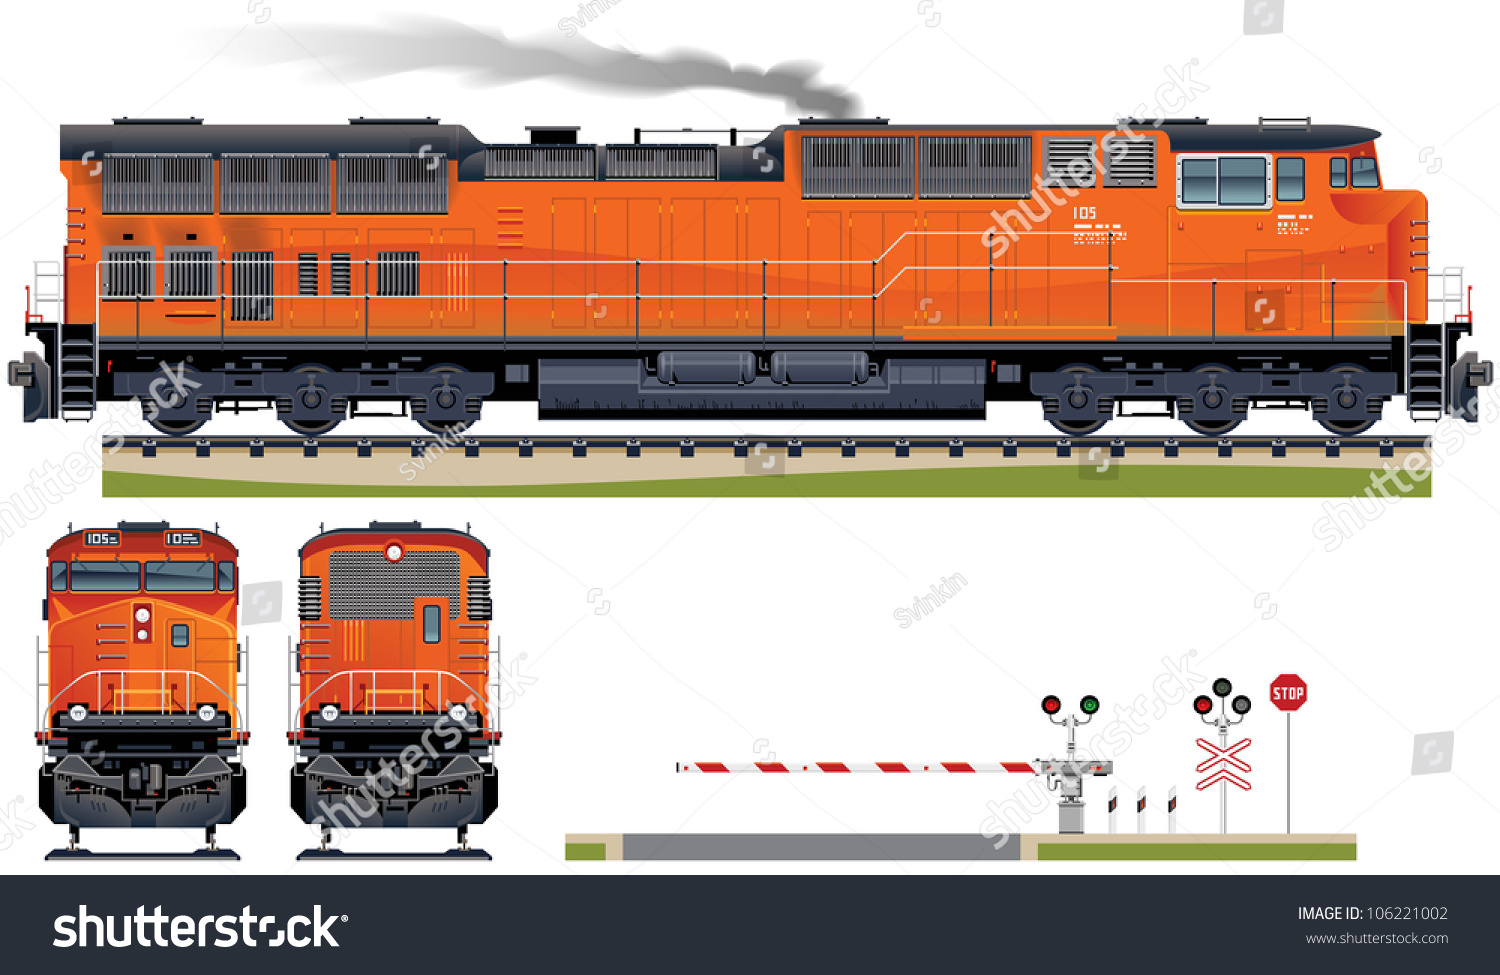 2,989 Freight train front Images, Stock Photos & Vectors | Shutterstock